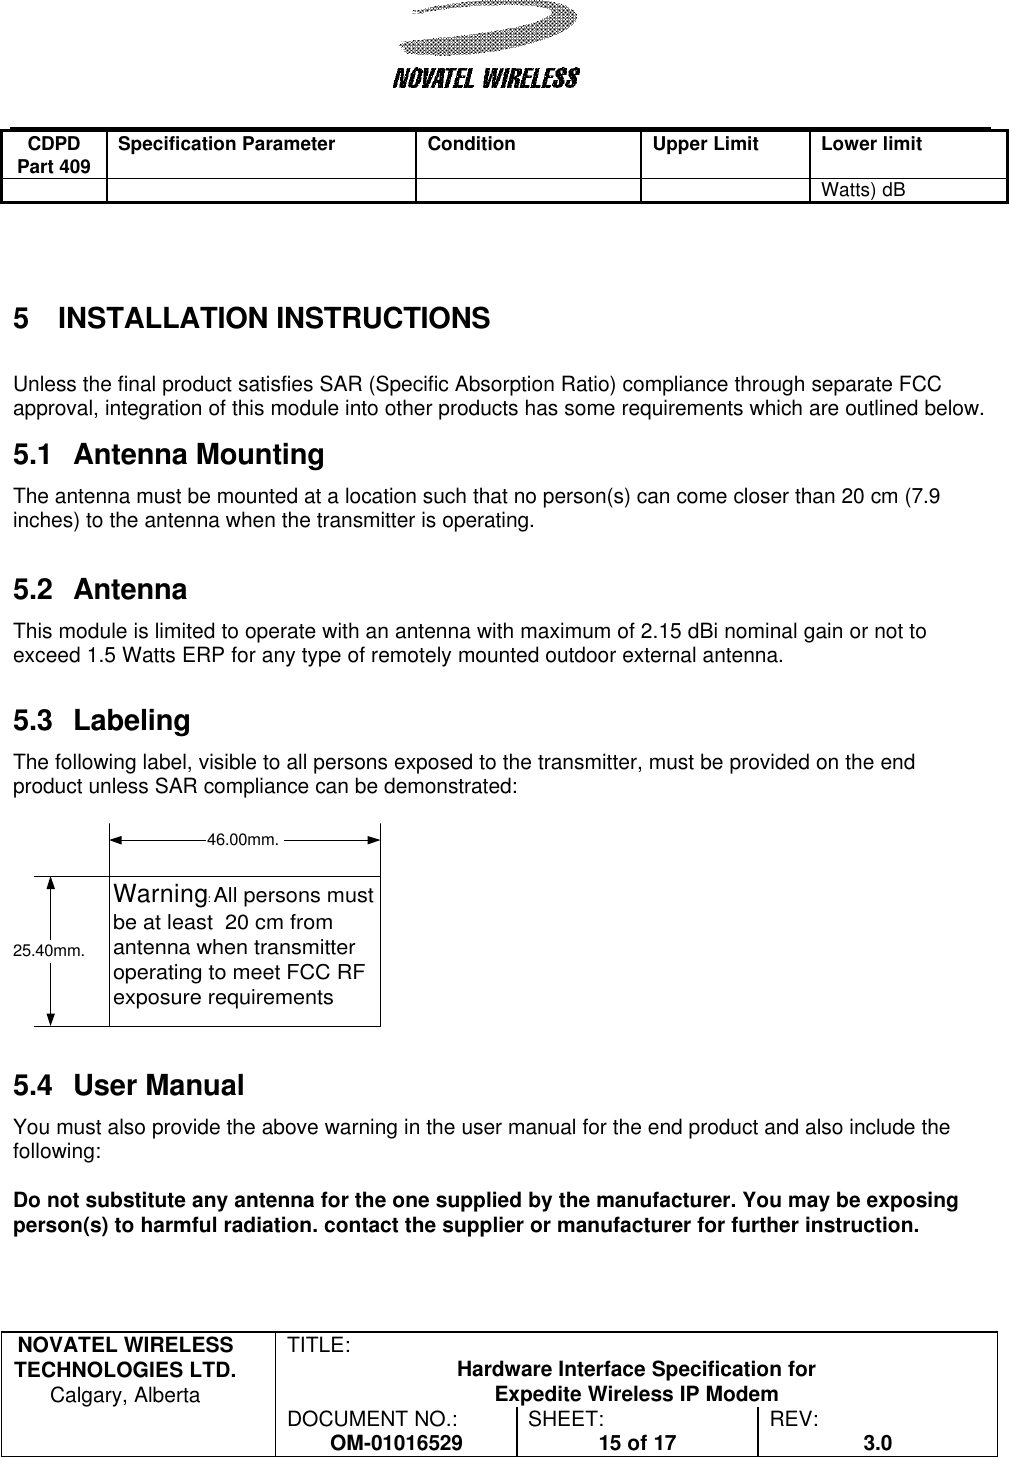   NOVATEL WIRELESS TECHNOLOGIES LTD.  Calgary, Alberta TITLE: Hardware Interface Specification for Expedite Wireless IP Modem  DOCUMENT NO.: OM-01016529 SHEET: 15 of 17 REV: 3.0   CDPD Part 409 Specification Parameter Condition Upper Limit Lower limit Watts) dB    5 INSTALLATION INSTRUCTIONS  Unless the final product satisfies SAR (Specific Absorption Ratio) compliance through separate FCC approval, integration of this module into other products has some requirements which are outlined below.  5.1 Antenna Mounting The antenna must be mounted at a location such that no person(s) can come closer than 20 cm (7.9 inches) to the antenna when the transmitter is operating.   5.2 Antenna  This module is limited to operate with an antenna with maximum of 2.15 dBi nominal gain or not to exceed 1.5 Watts ERP for any type of remotely mounted outdoor external antenna.  5.3 Labeling The following label, visible to all persons exposed to the transmitter, must be provided on the end product unless SAR compliance can be demonstrated:   5.4 User Manual You must also provide the above warning in the user manual for the end product and also include the following:  Do not substitute any antenna for the one supplied by the manufacturer. You may be exposing person(s) to harmful radiation. contact the supplier or manufacturer for further instruction.  Warning: All persons mustbe at least  20 cm fromantenna when transmitteroperating to meet FCC RFexposure requirements46.00mm.25.40mm.